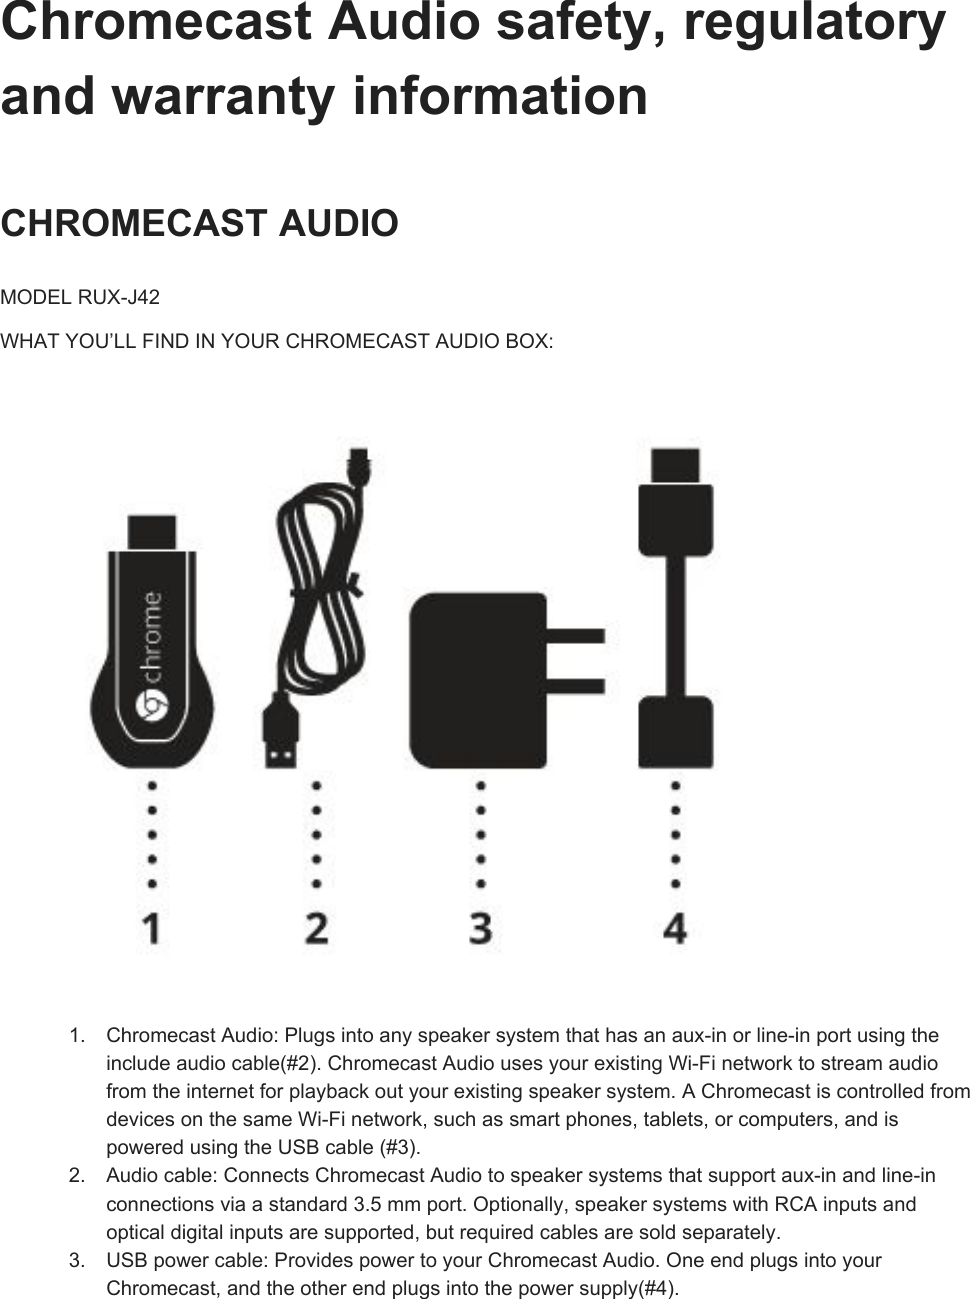 ChromecastAudiosafety,regulatoryandwarrantyinformationCHROMECASTAUDIOMODELRUXJ42WHATYOU’LLFINDINYOURCHROMECASTAUDIOBOX:1. ChromecastAudio:Plugsintoanyspeakersystemthathasanauxinorlineinportusingtheincludeaudiocable(#2).ChromecastAudiousesyourexistingWiFinetworktostreamaudiofromtheinternetforplaybackoutyourexistingspeakersystem.AChromecastiscontrolledfromdevicesonthesameWiFinetwork,suchassmartphones,tablets,orcomputers,andispoweredusingtheUSBcable(#3).2. Audiocable:ConnectsChromecastAudiotospeakersystemsthatsupportauxinandlineinconnectionsviaastandard3.5mmport.Optionally,speakersystemswithRCAinputsandopticaldigitalinputsaresupported,butrequiredcablesaresoldseparately.3. USBpowercable:ProvidespowertoyourChromecastAudio.OneendplugsintoyourChromecast,andtheotherendplugsintothepowersupply(#4).